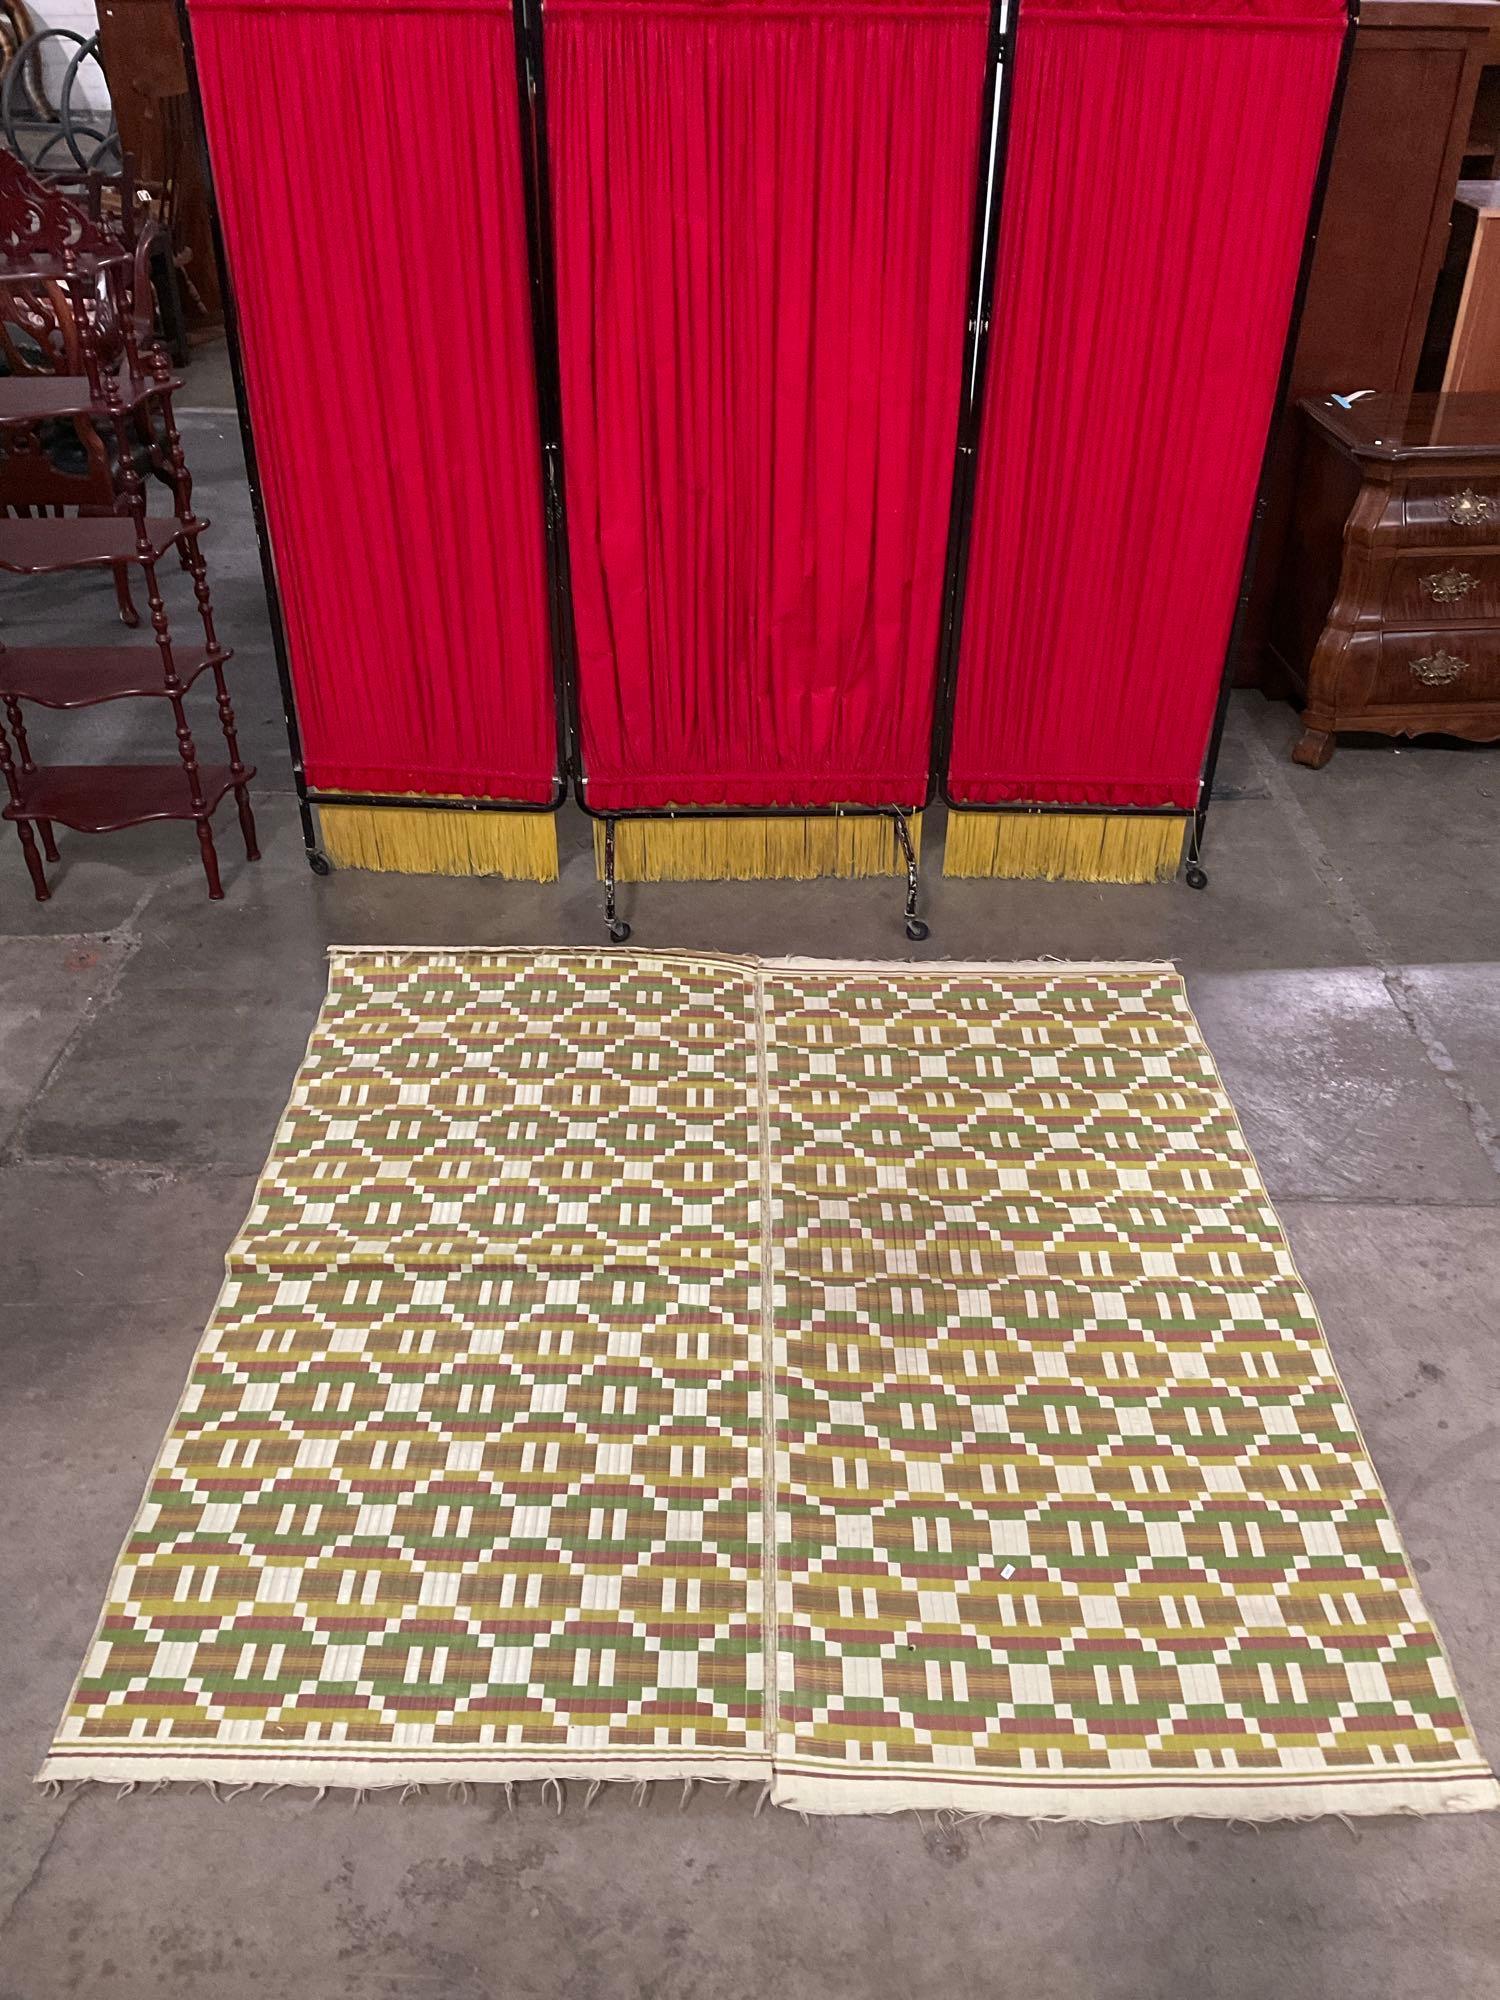 Vintage Japanese Tatami Floor Mat w/ Red, Green & Yellow Stripes. Measures 72" x 68.5" See pics.